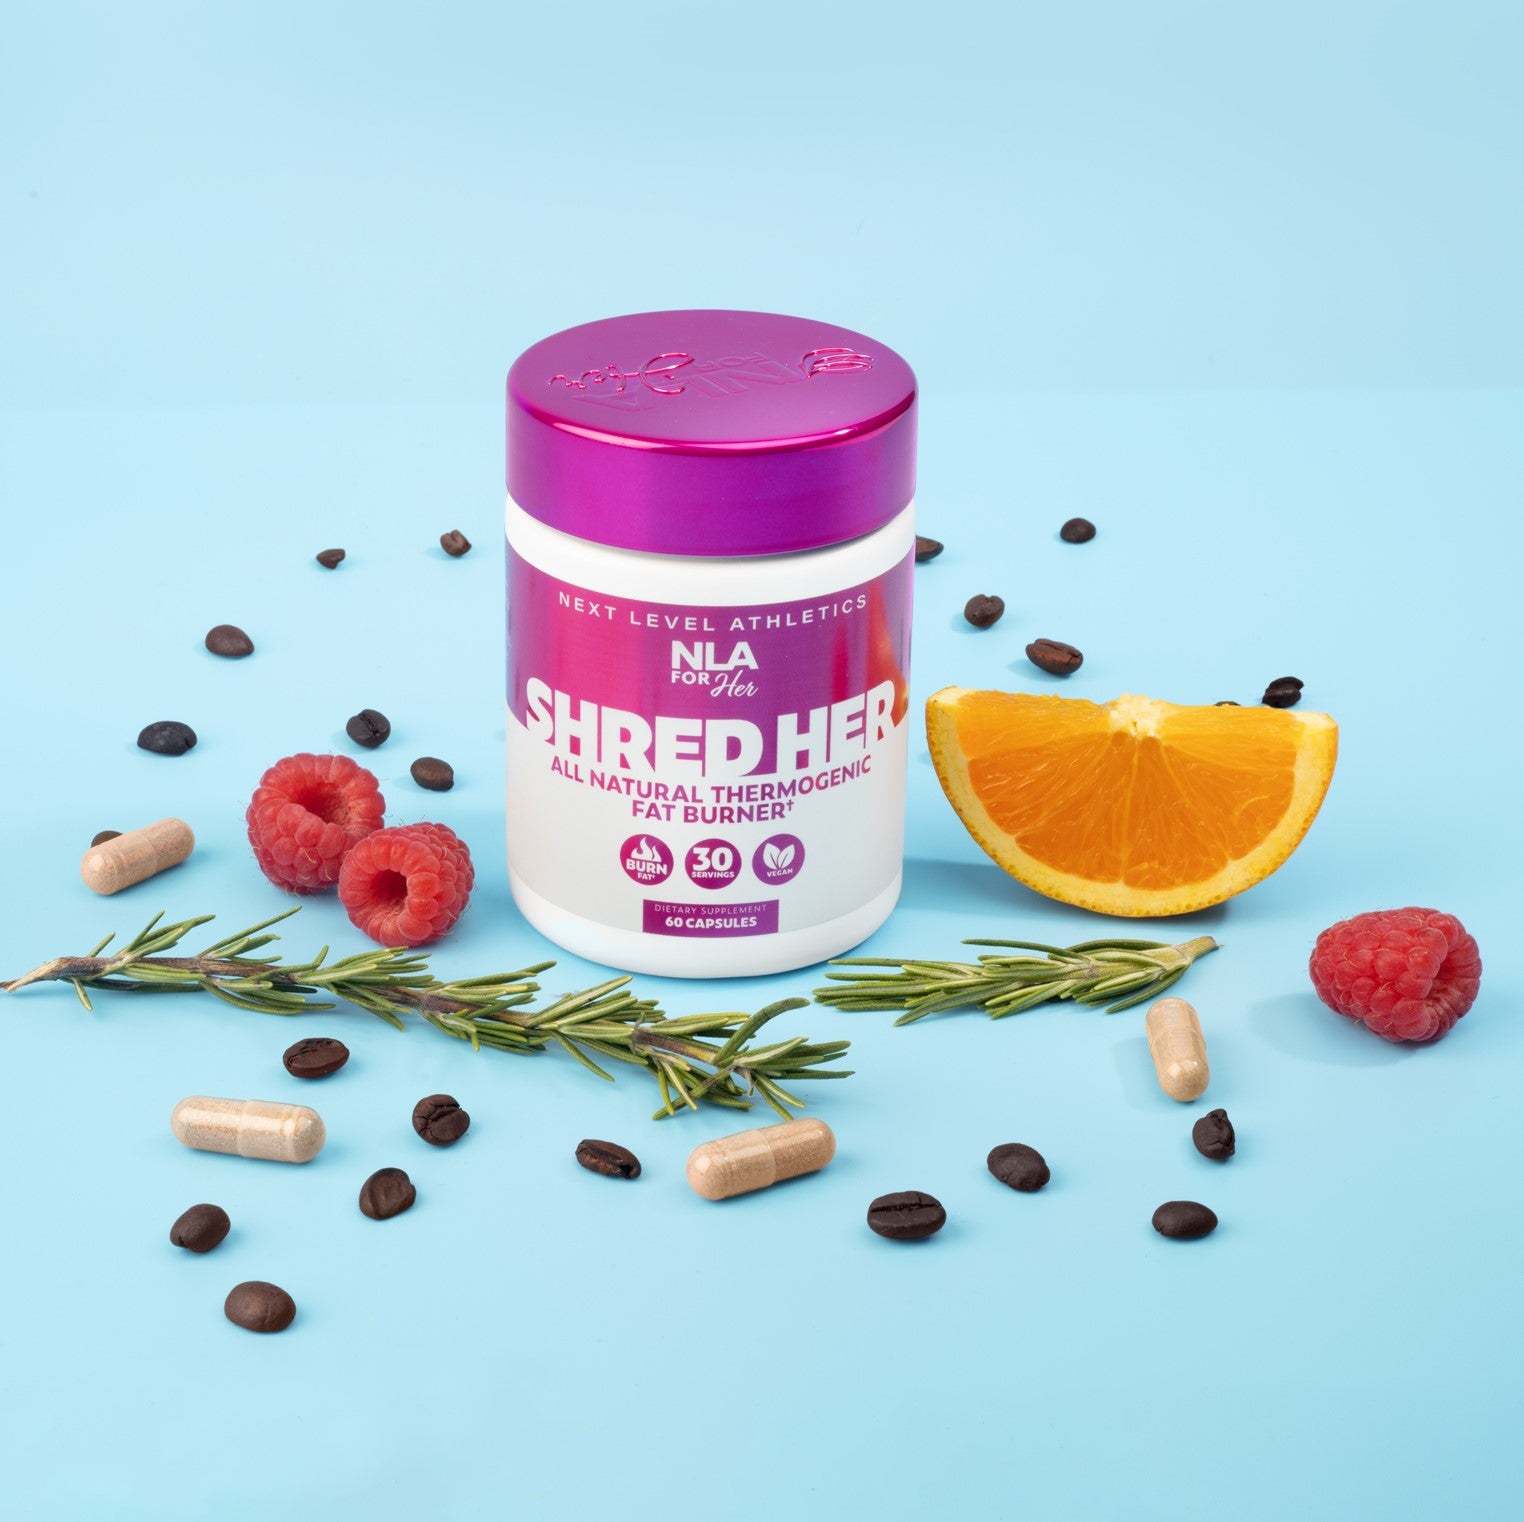 5 Surprising Benefits of Shred Her